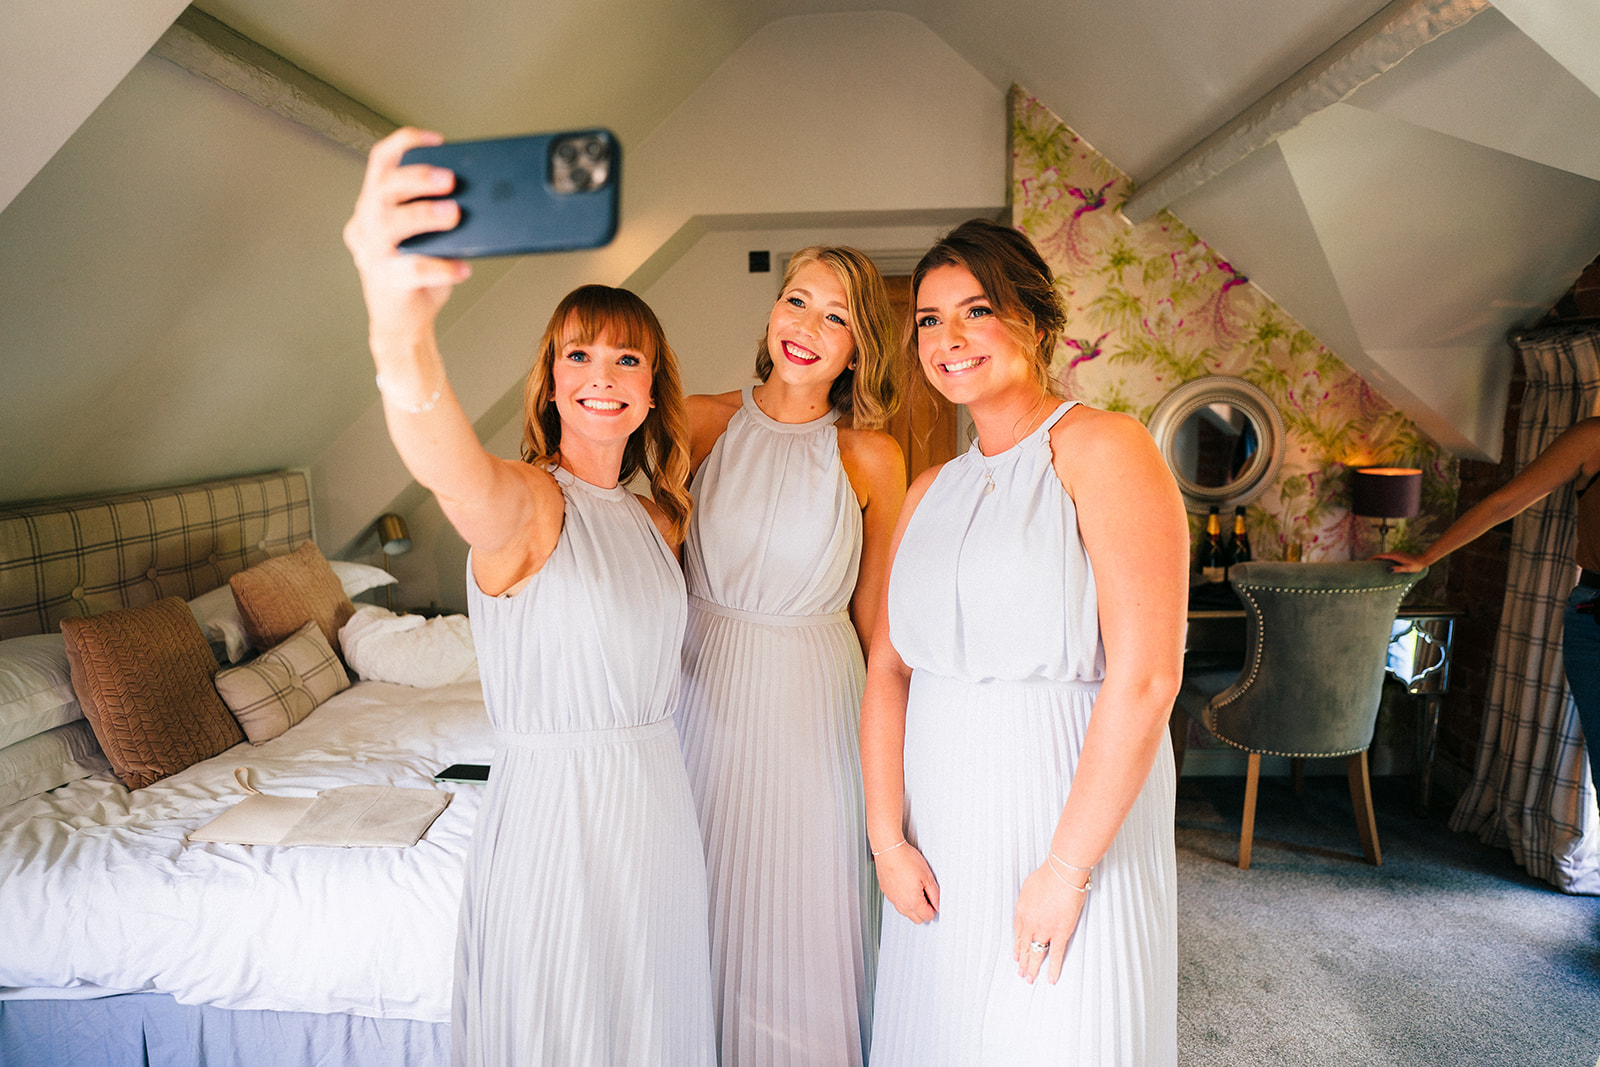 The Chequers Inn Wedding Photography - a selfie photo of the bridesmaids